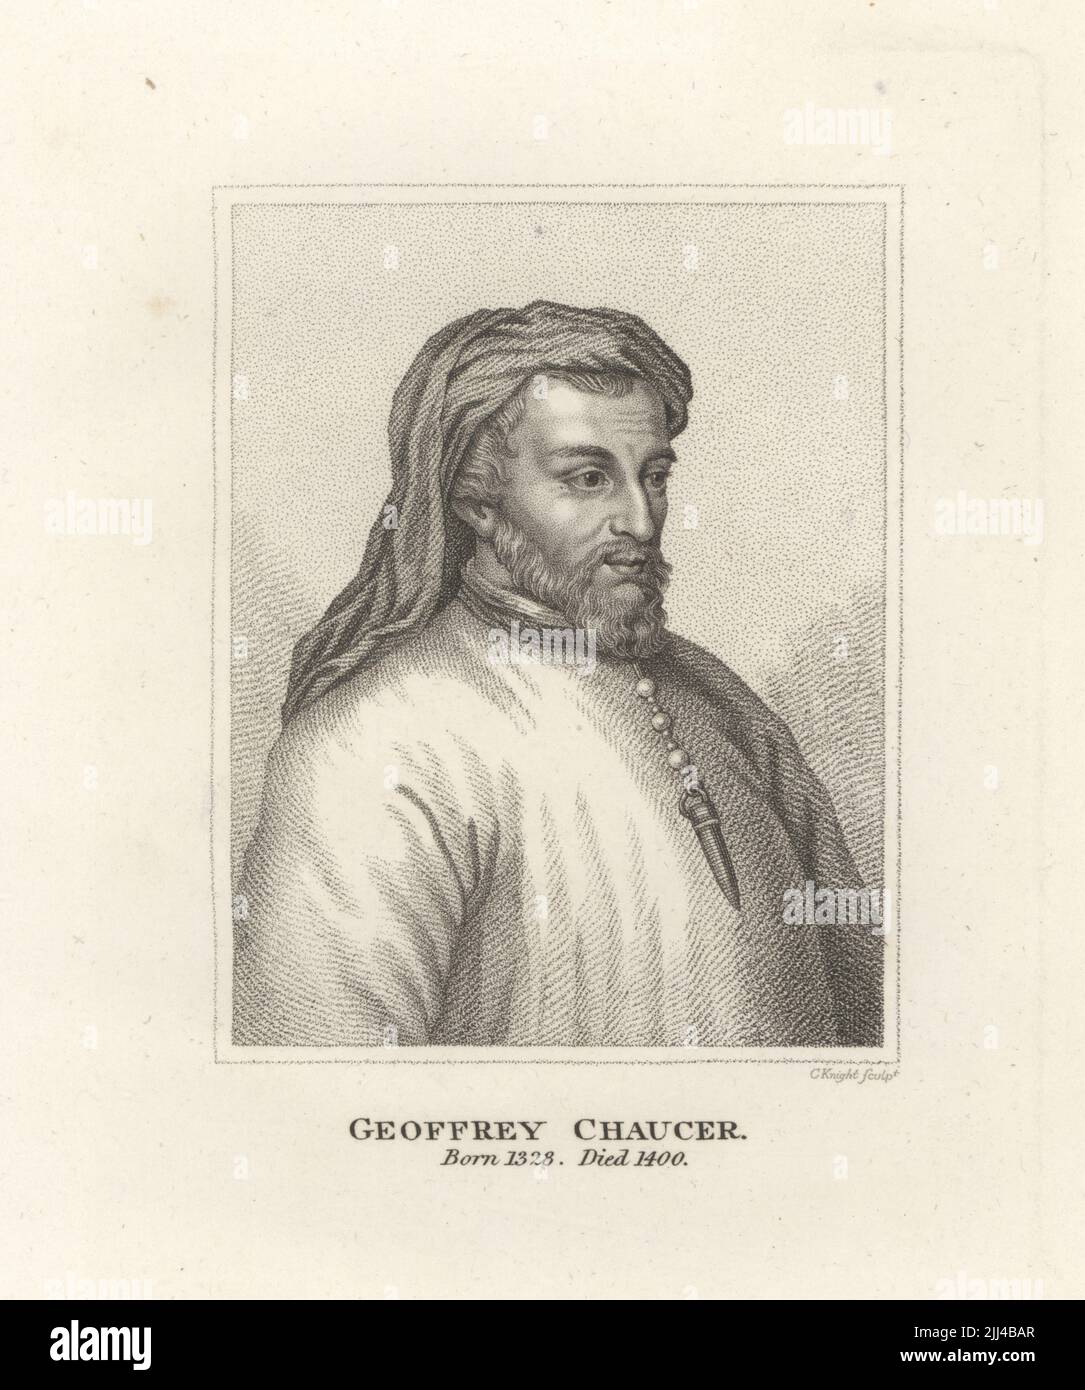 Geoffrey Chaucer, English author and poet, writer of The Canterbury Tales, first book publshed by printing press in England,  1328-1400. Copperplate engraving by Charles Knight from Samuel Woodburn’s Gallery of Rare Portraits Consisting of Original Plates, George Jones, 102 St Martin’s Lane, London, 1816. Stock Photo